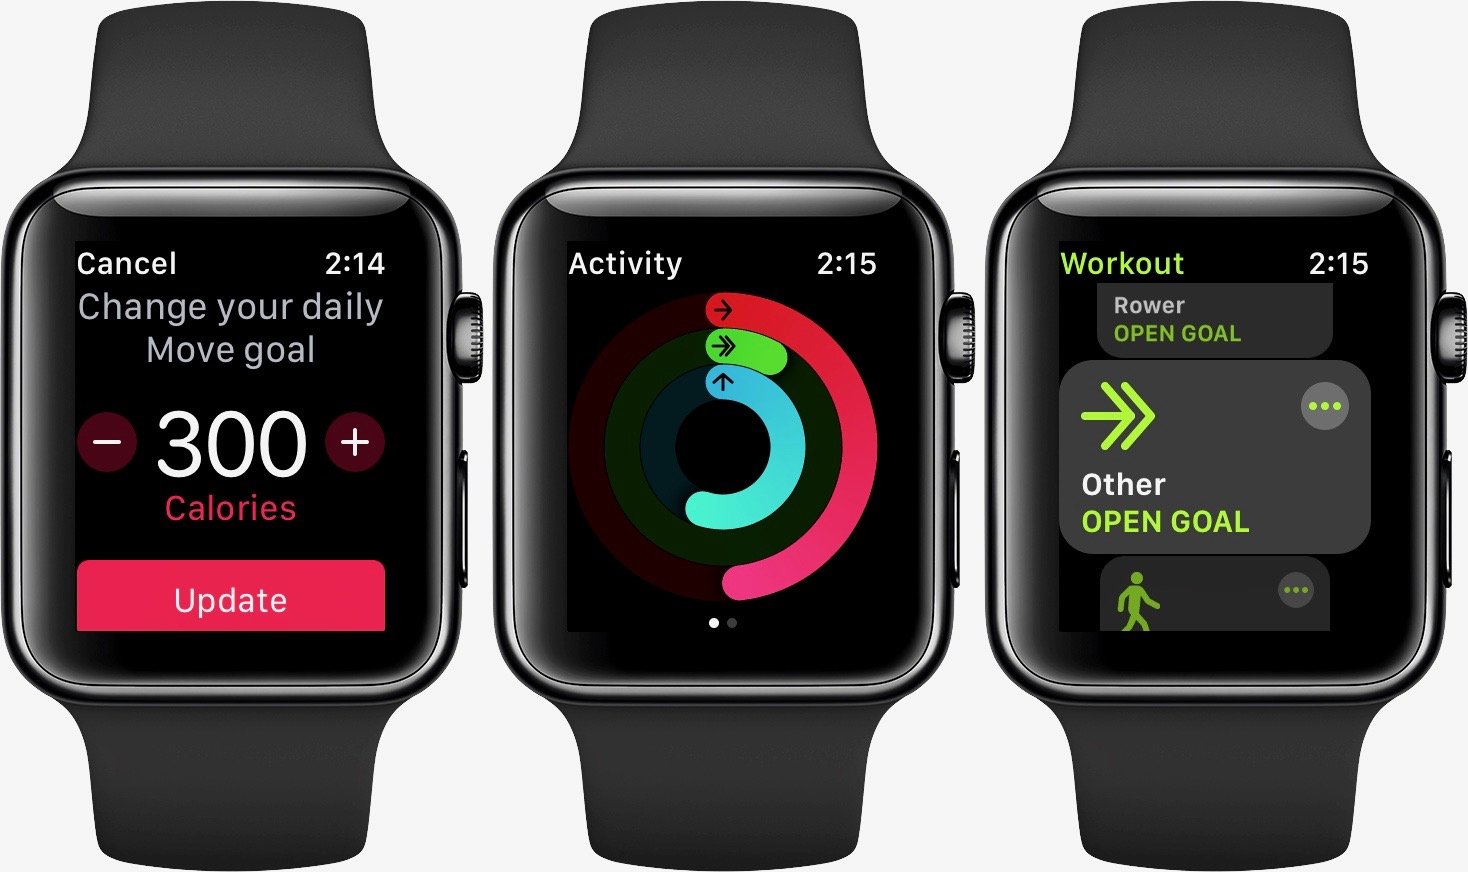 Apple Watch: How to change exercise goal